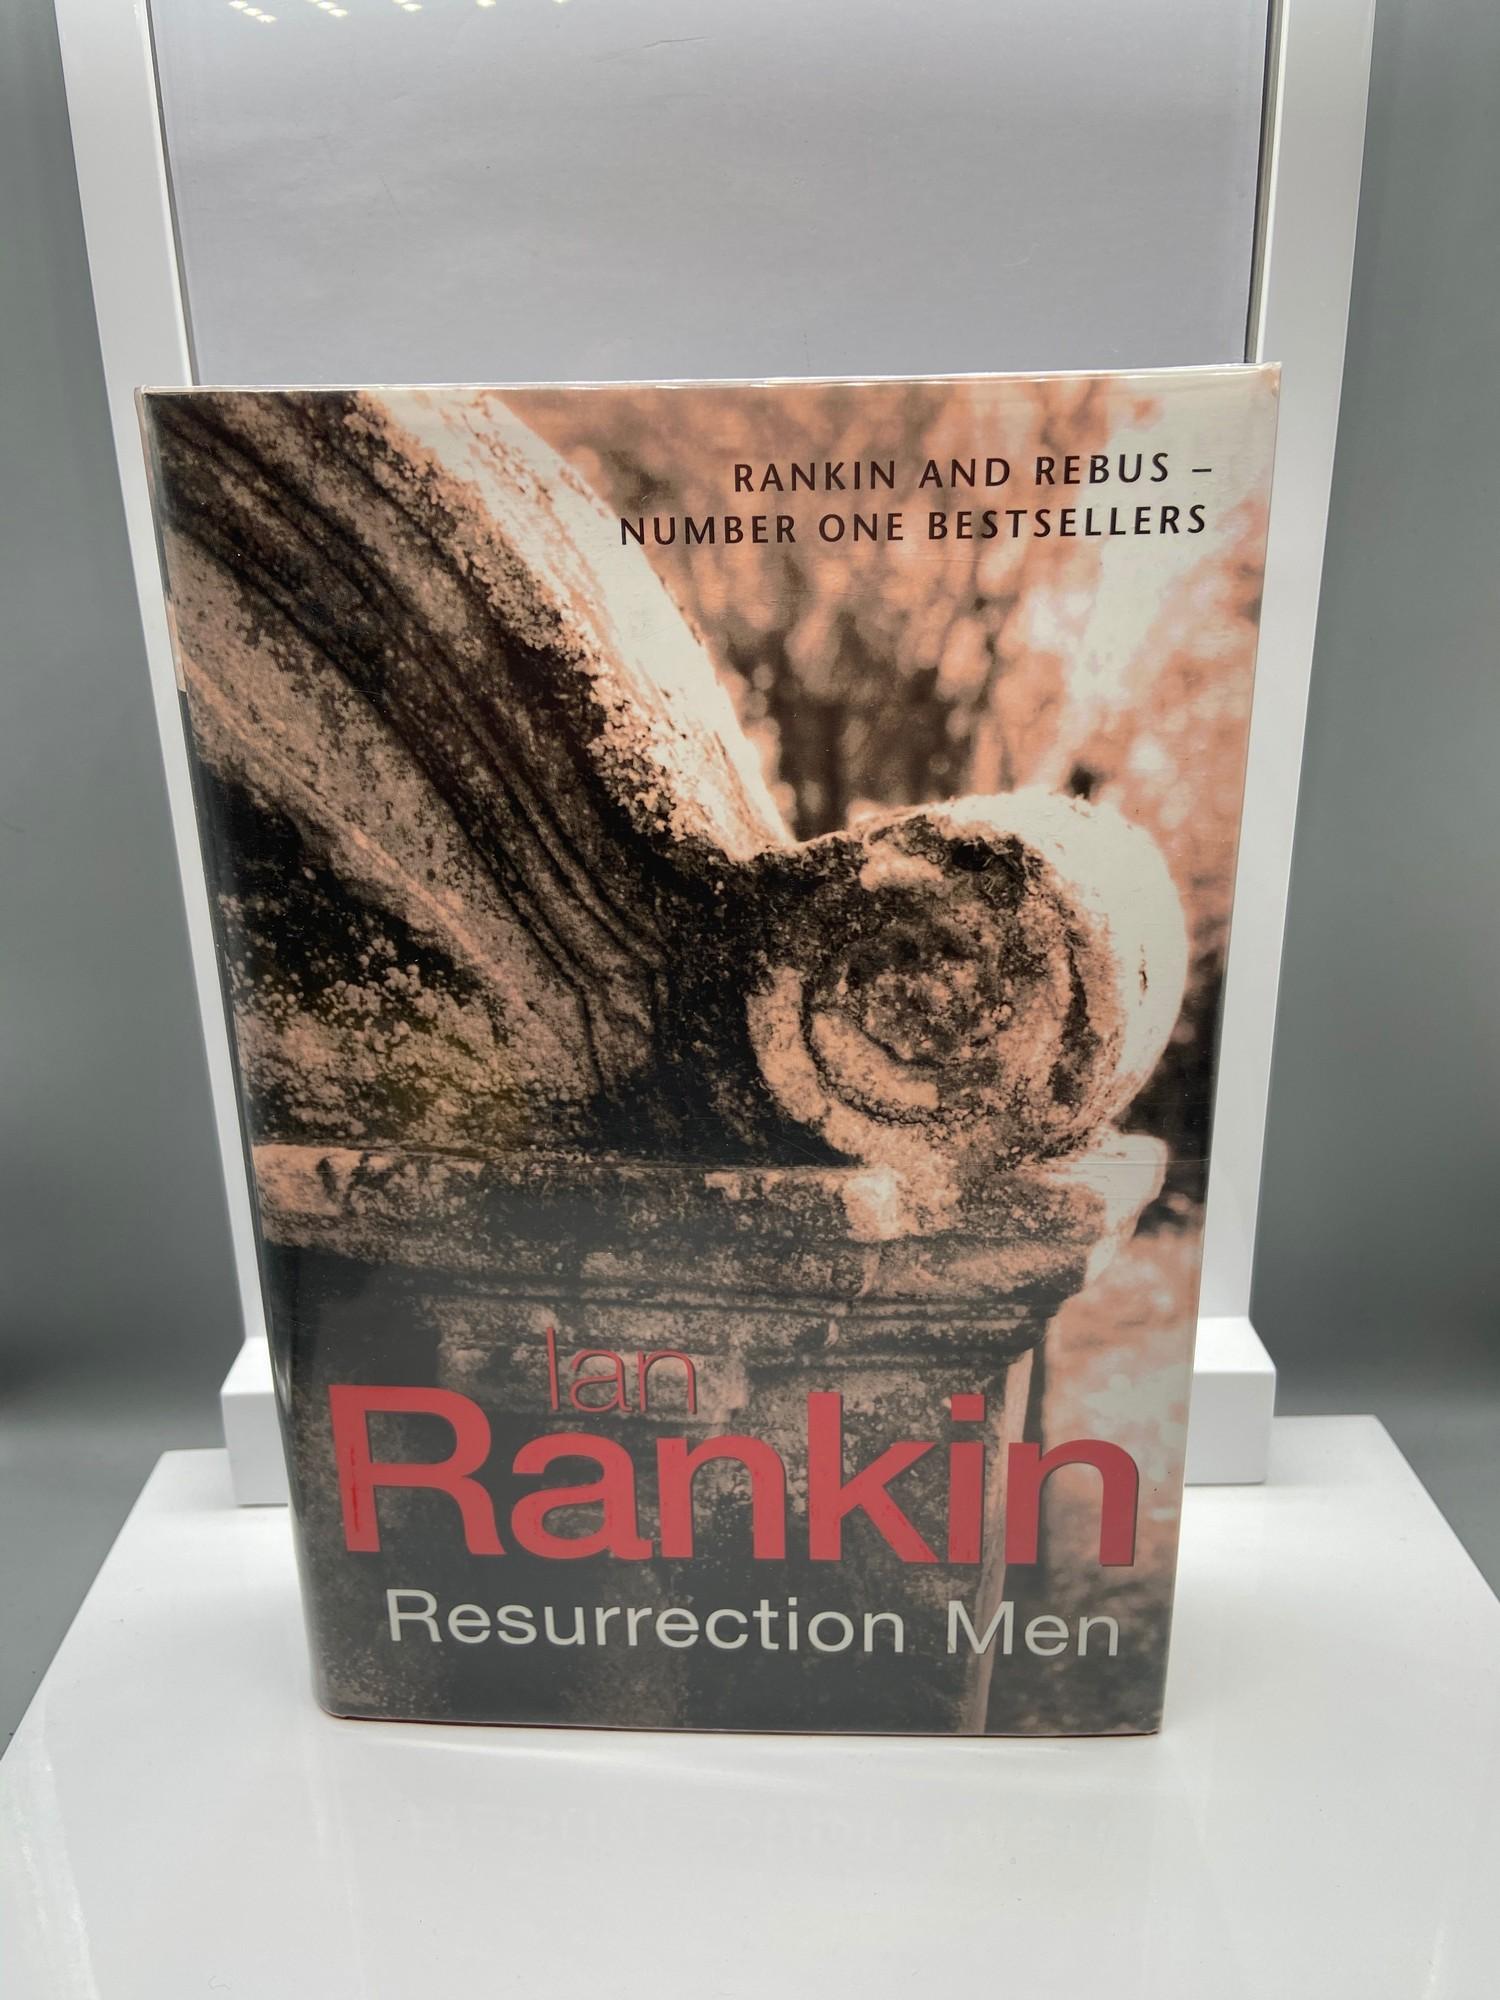 A Signed book by Ian Rankin titled Resurrection Men. Signed in pen and Gallows doodle drawing by the